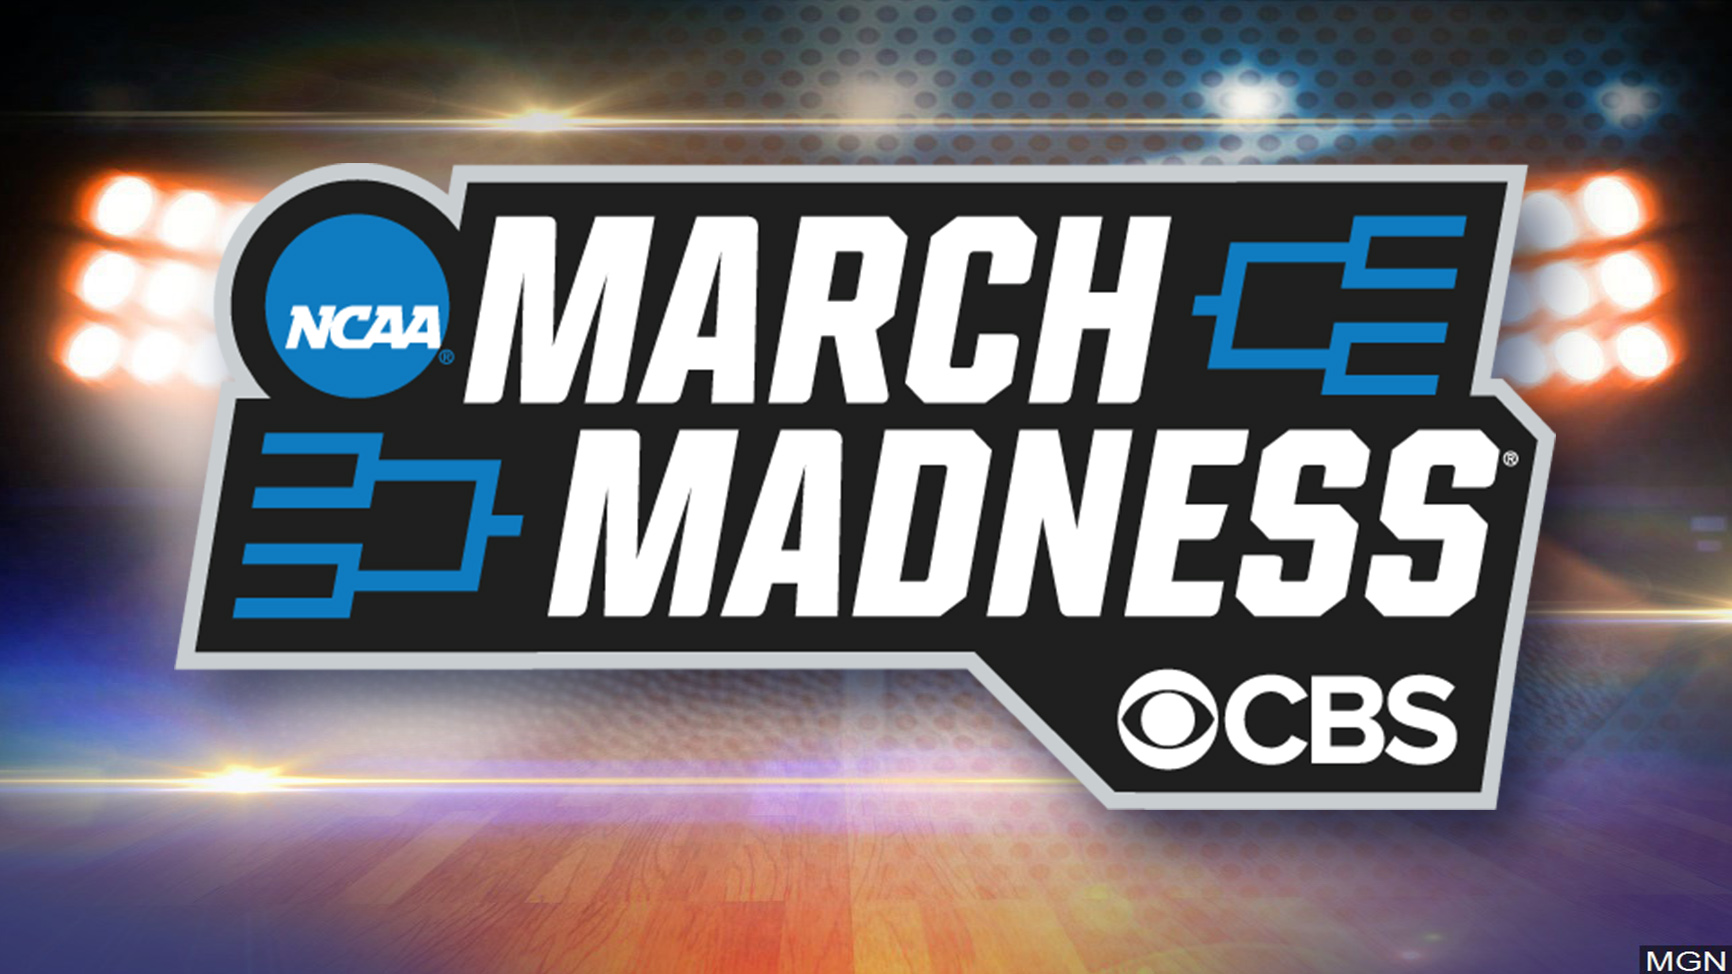 CBS announces March Madness schedule